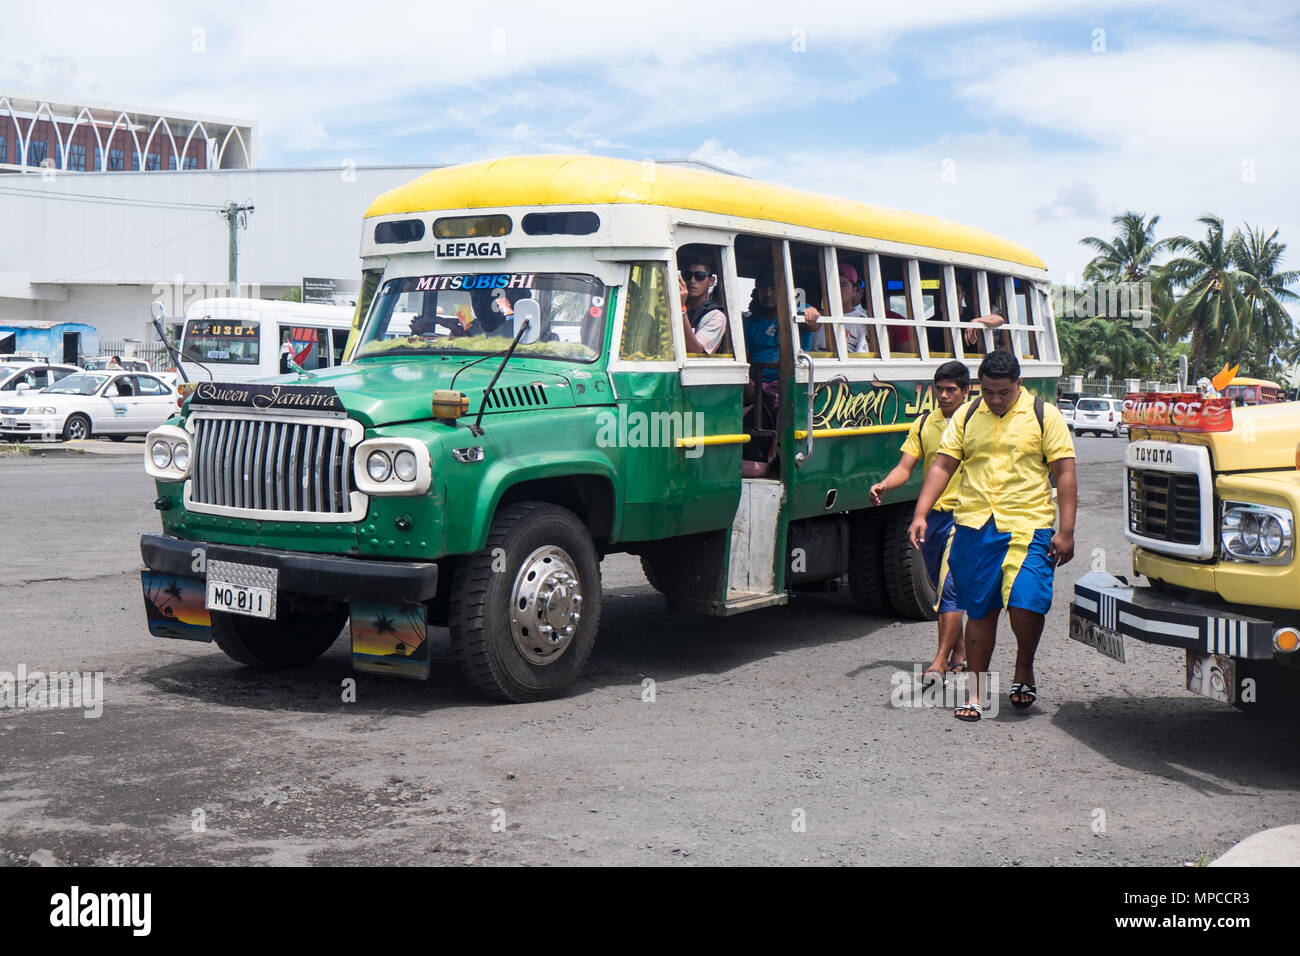 Apia, Samoa - October 30, 2017: People at Apia bus station, with colorful vintage buses on Upolu Island Stock Photo